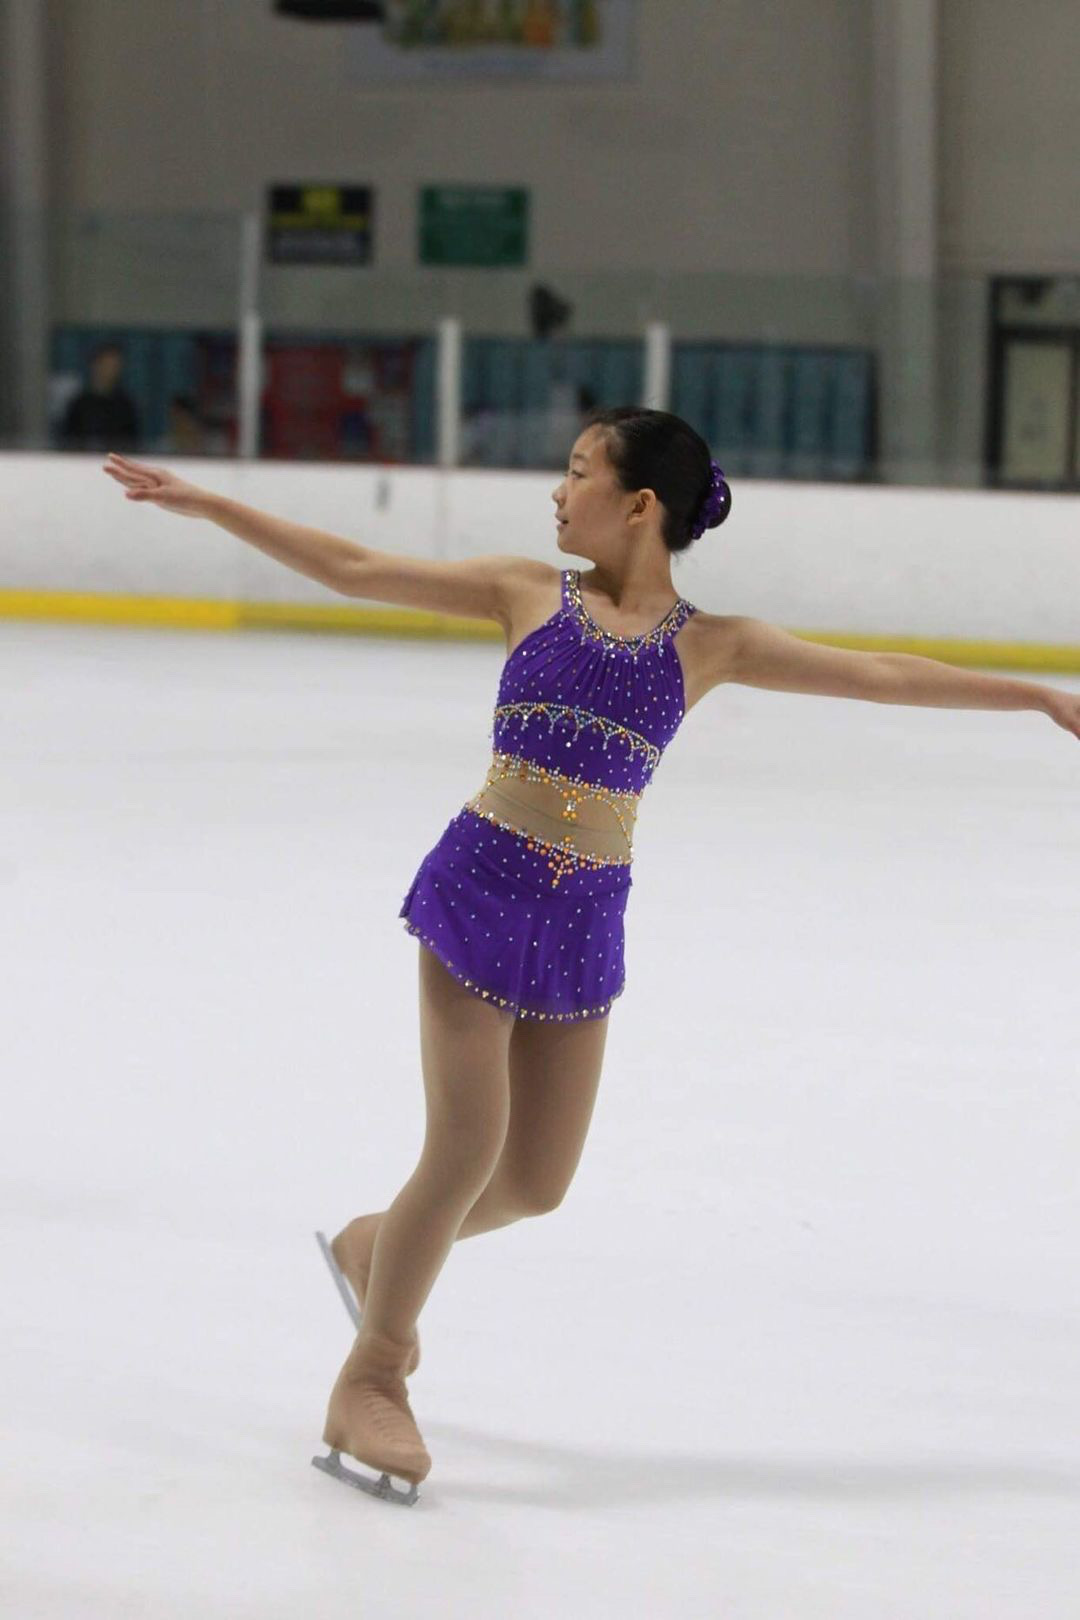 Thumbnail for Kelly Wu: Figure skating with fearlessness